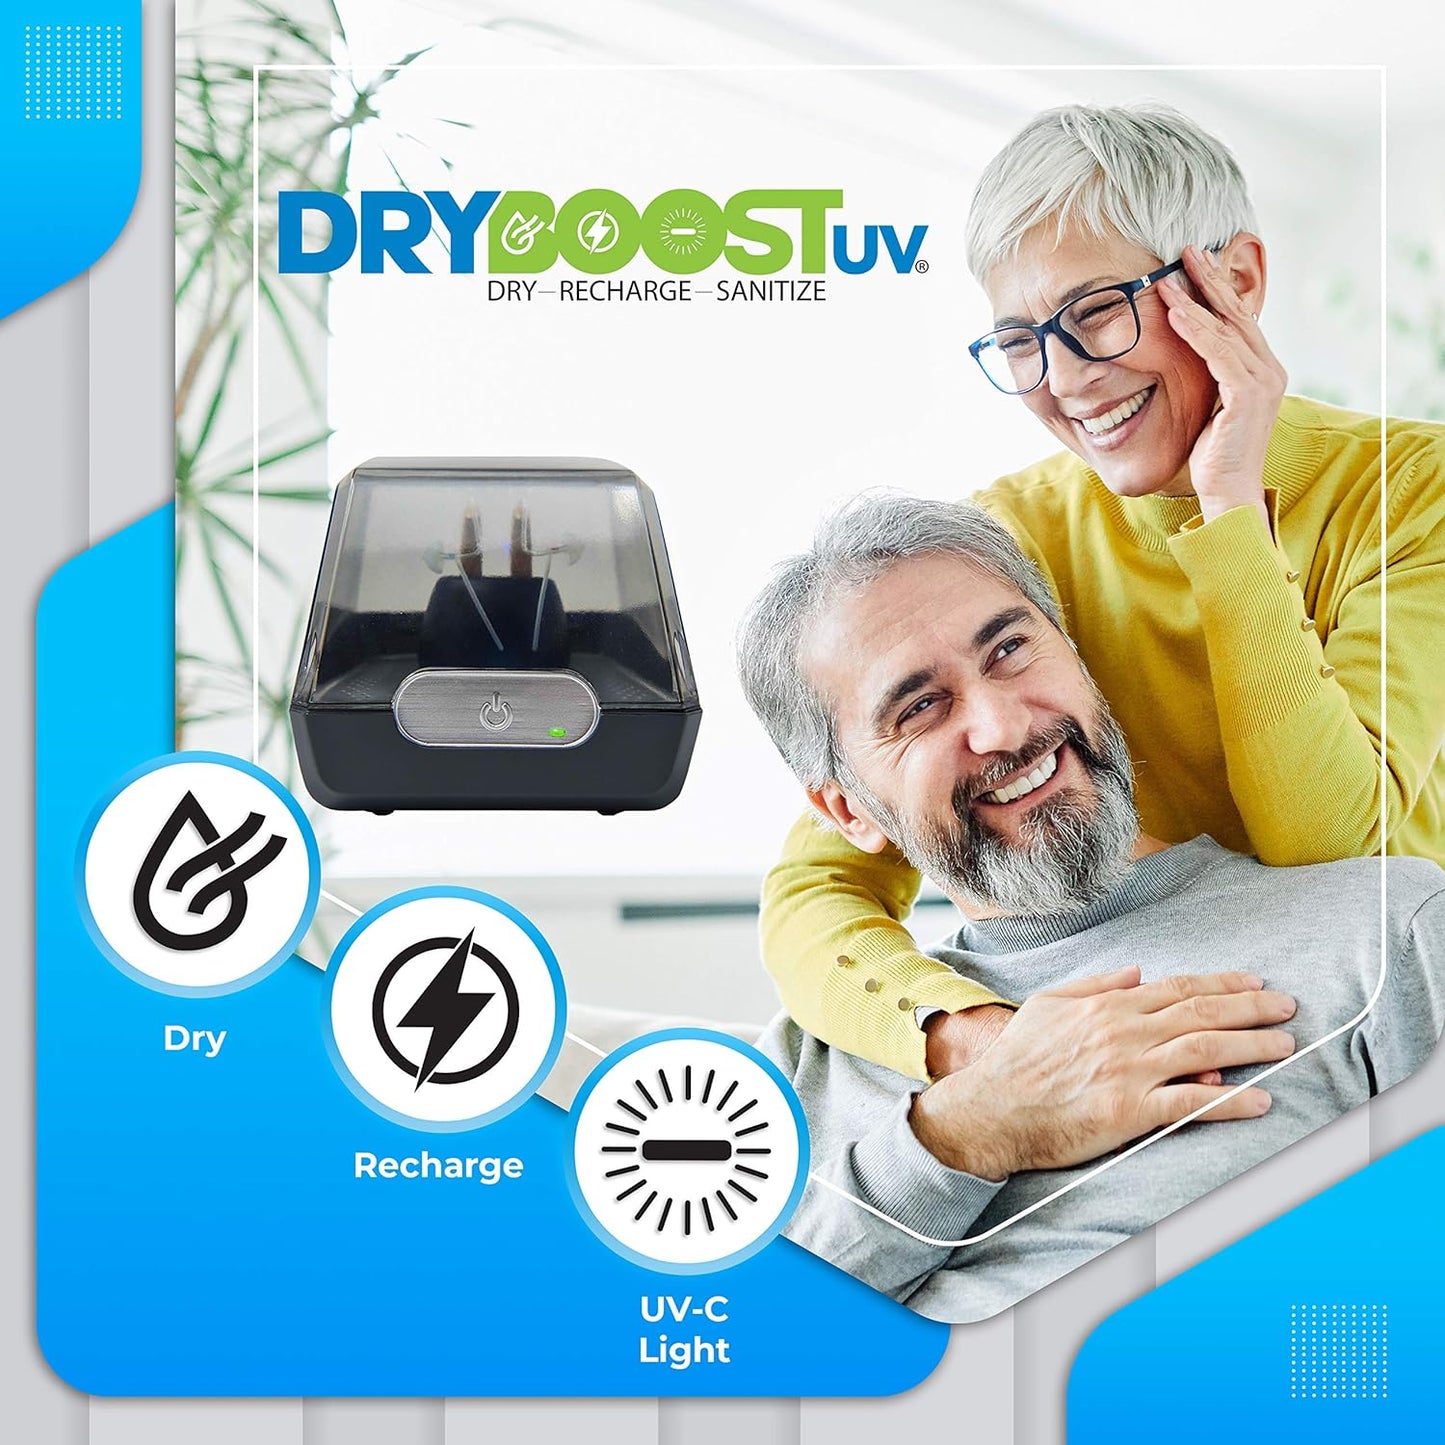 DryBoost UV by Dry & Store | Maintenance System for Your Rechargeable Hearing Aids or Amplifiers - The Perfect Combination of Drying, Sanitizing, and Charging